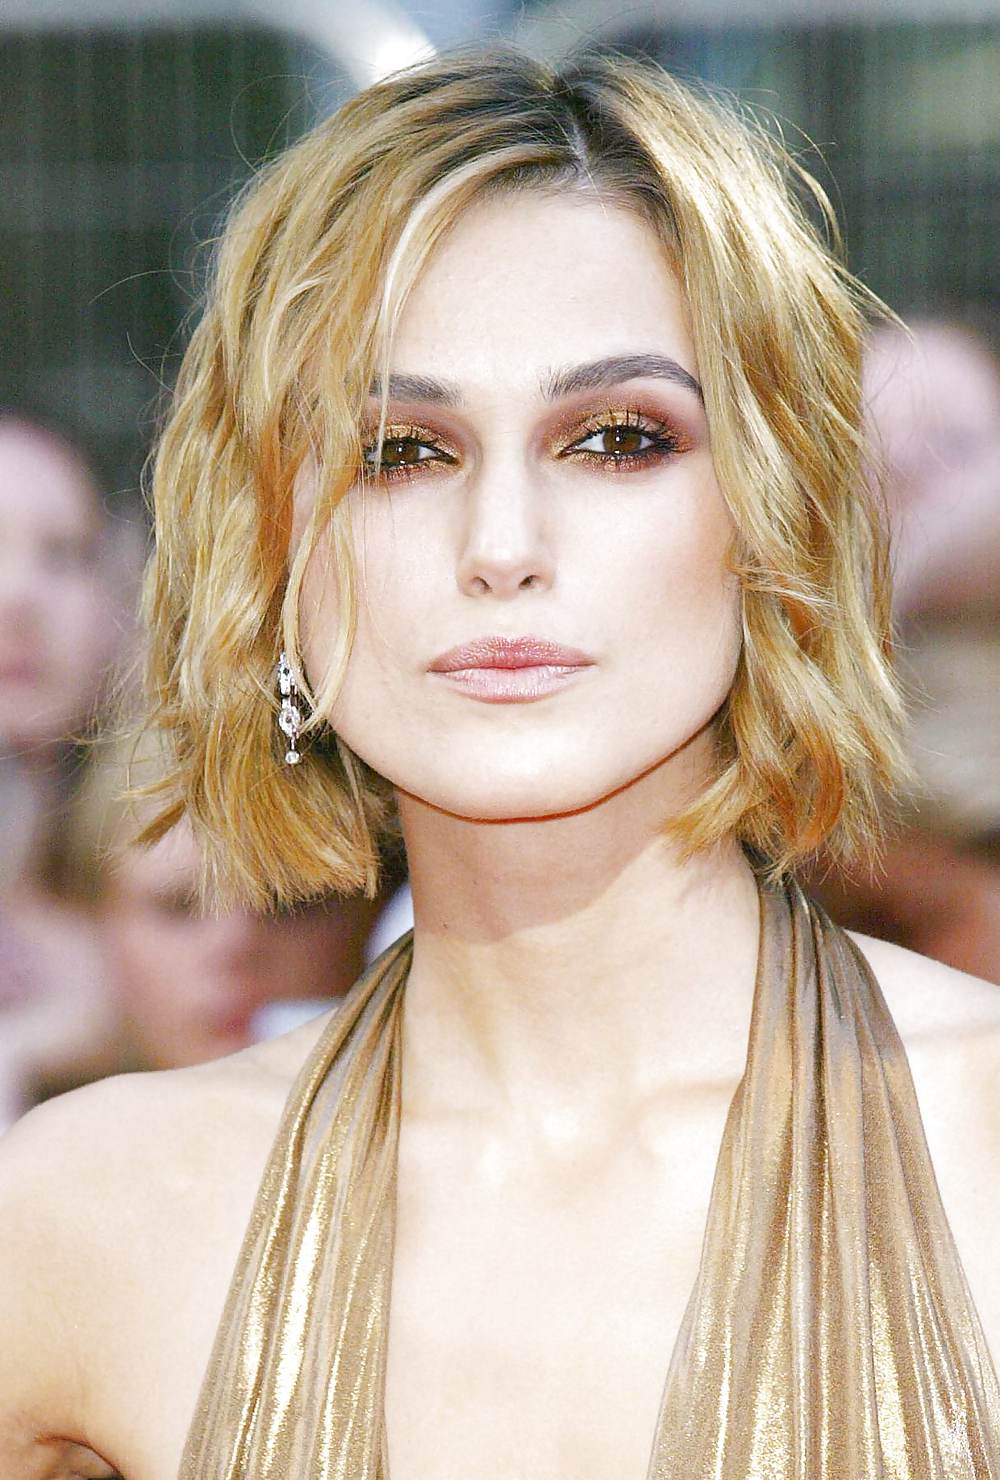 Keira Knightley The Royal Lady of England #35650340